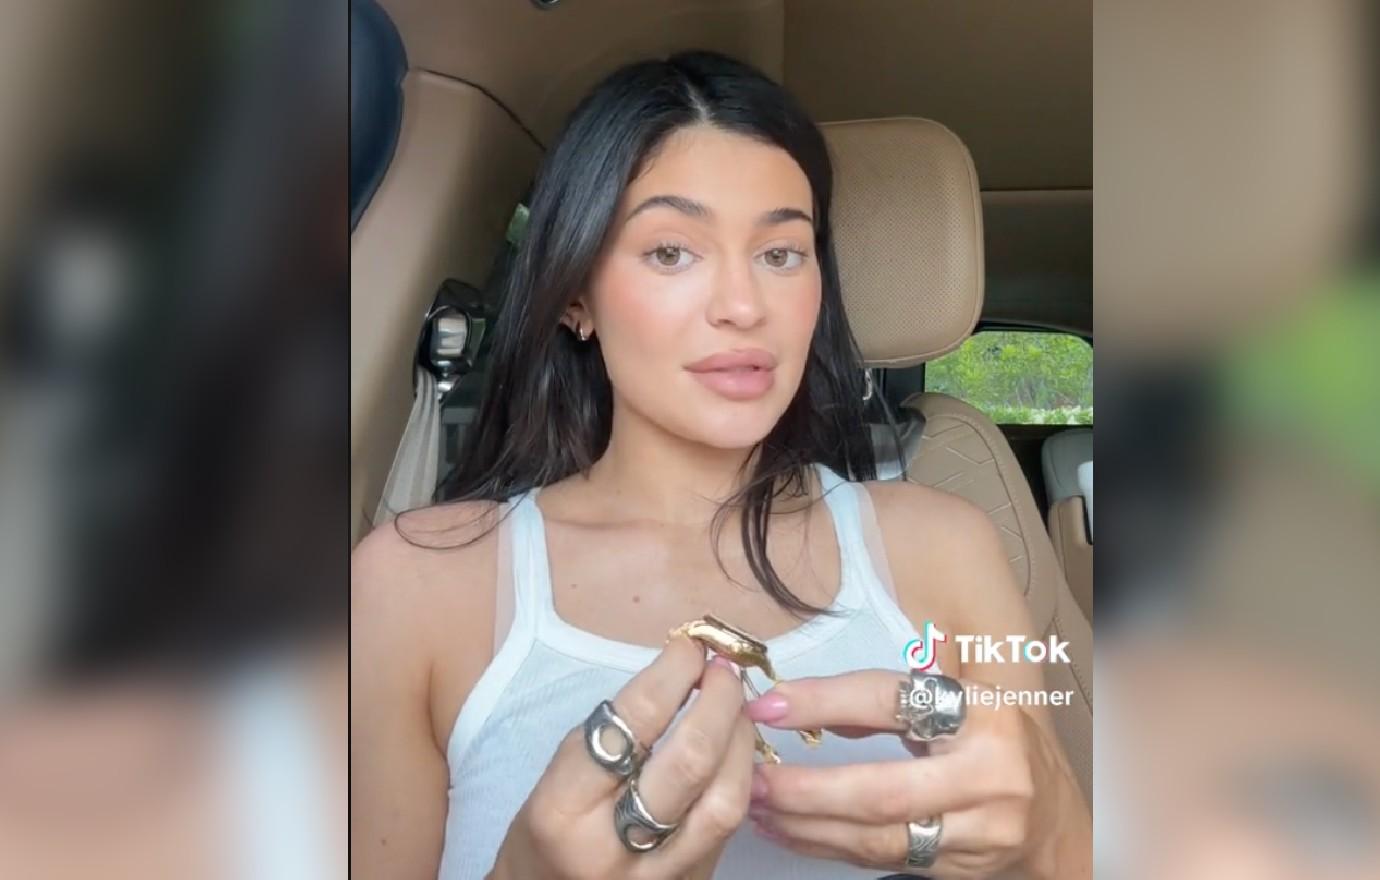 Kylie Jenner slammed for 'ridiculous' lips as star busts out of black bra  in sexy TikTok video